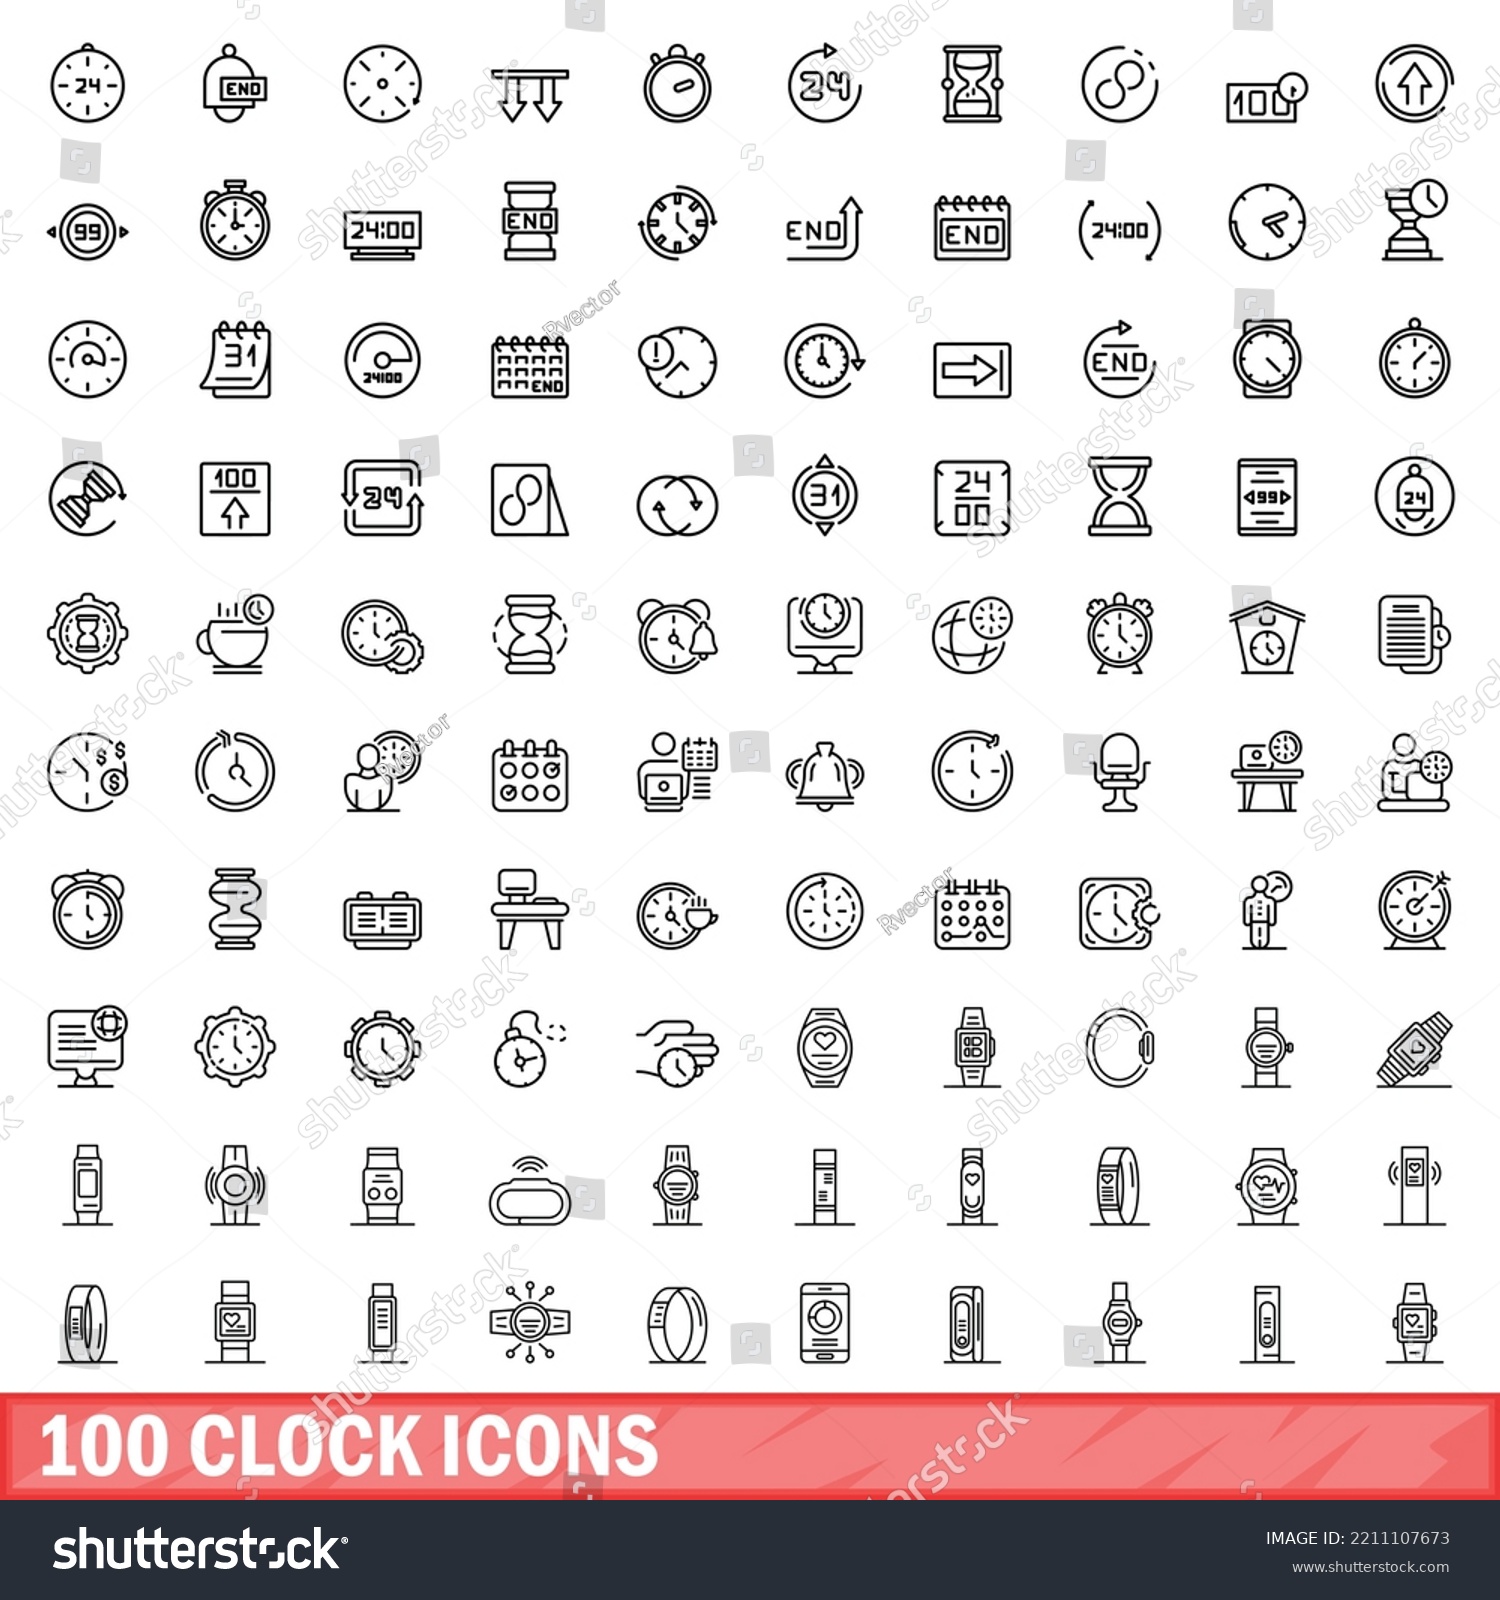 SVG of 100 clock icons set. Outline illustration of 100 clock icons vector set isolated on white background svg